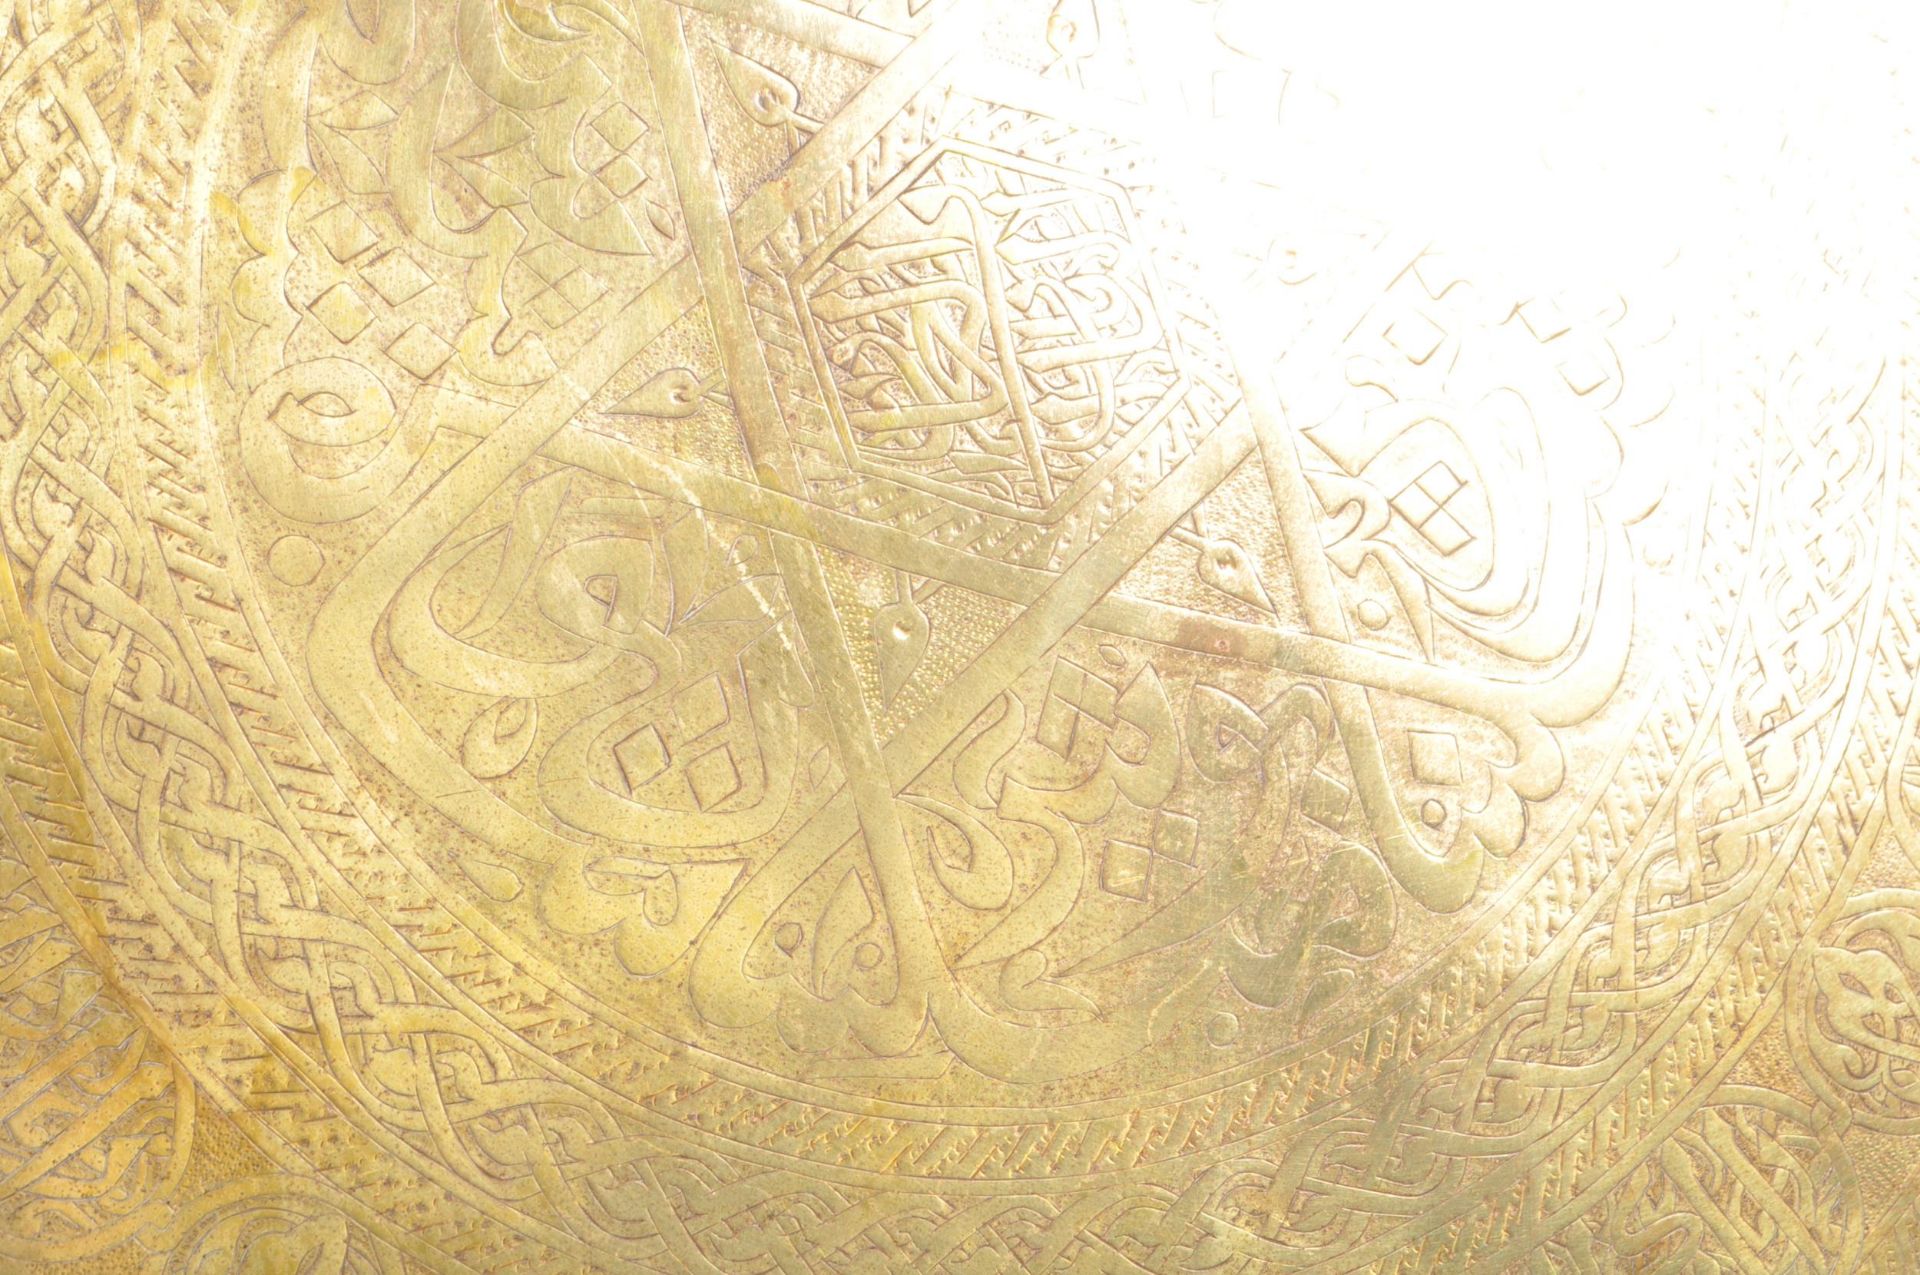 LARGE 20TH CENTURY ISLAMIC BRASS ENGRAVED WALL CHARGER - Image 6 of 8